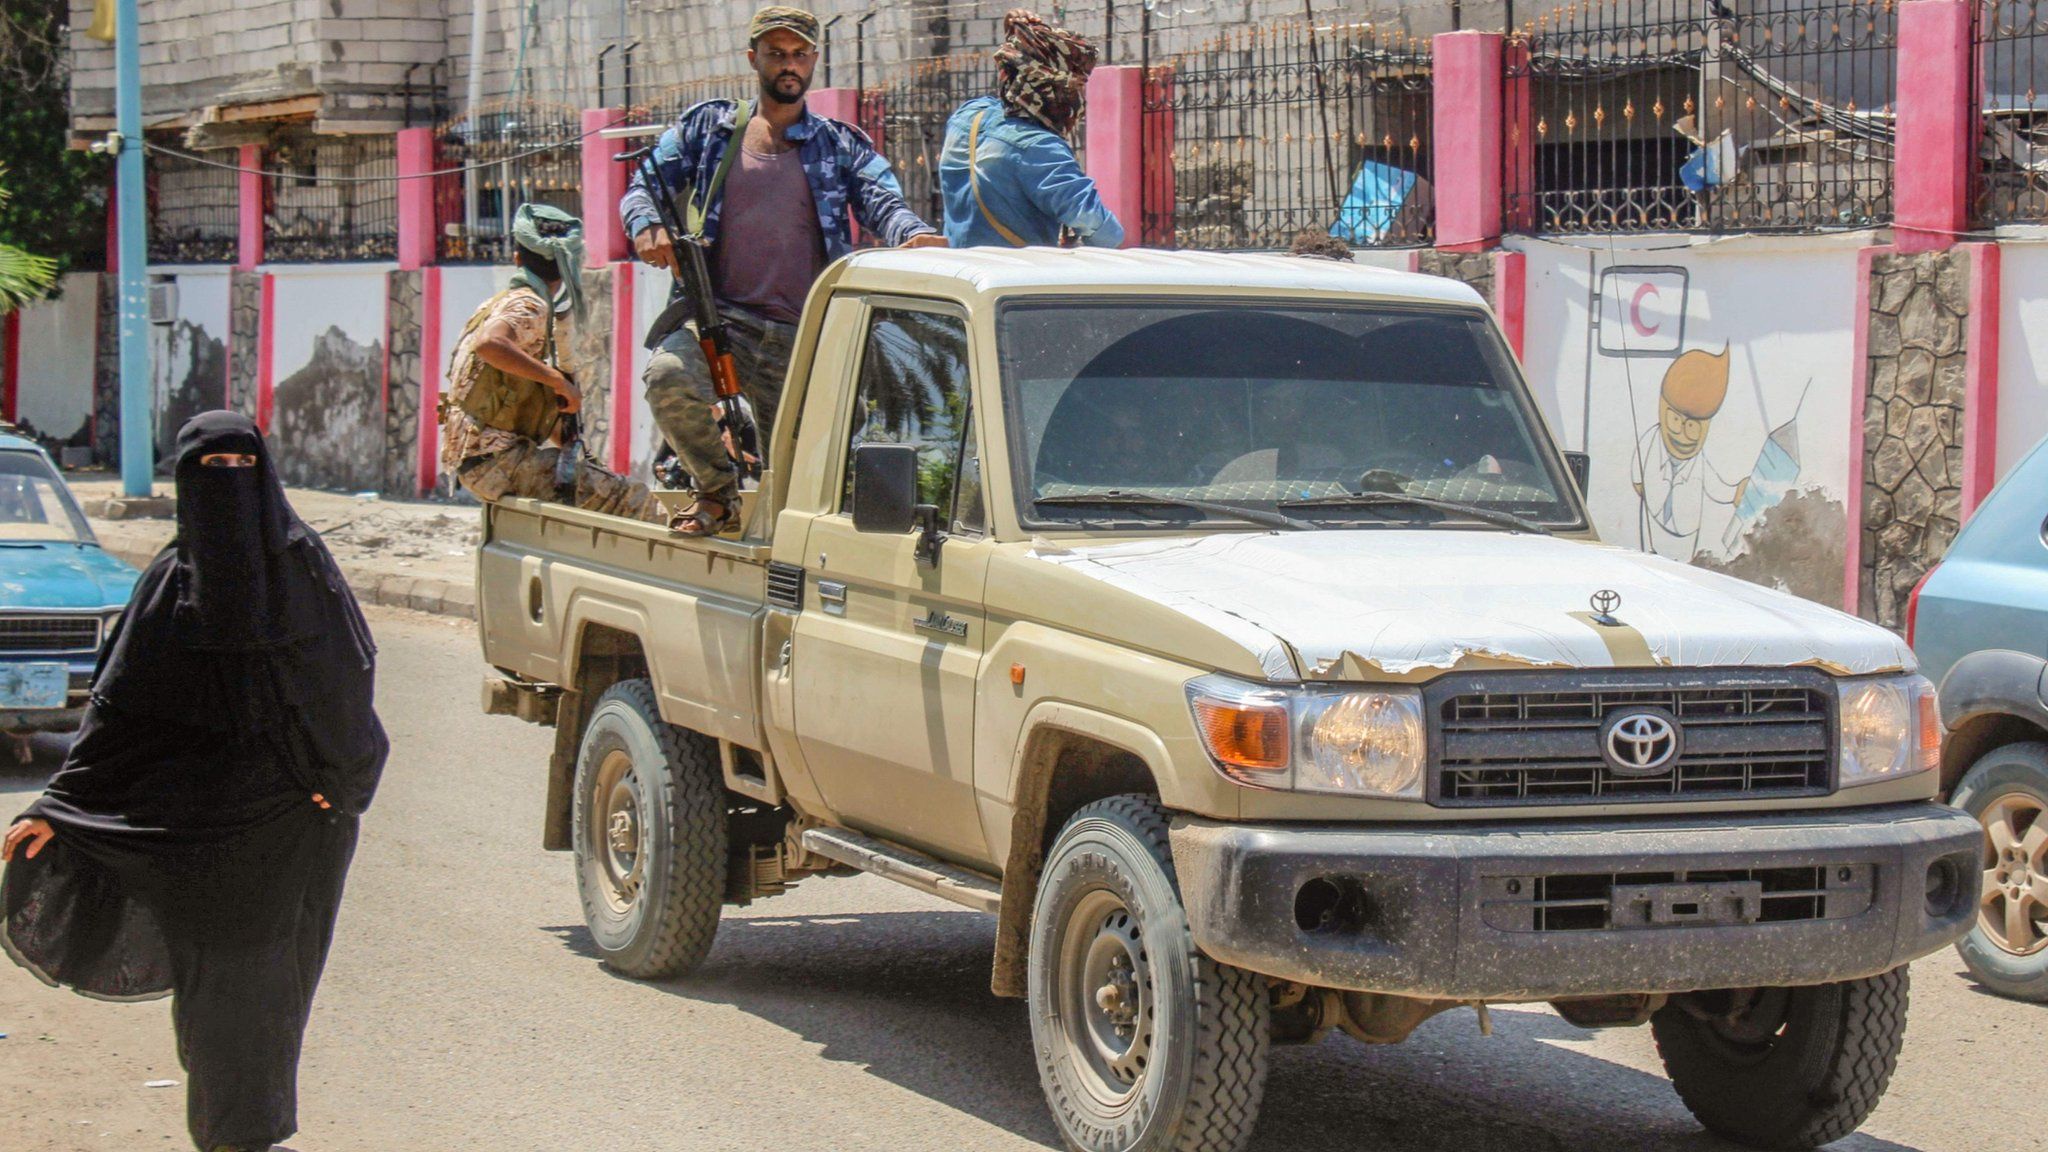 Fighters from the separatist Southern Transitional Council (STC) patrol the streets of Aden, Yemen, on 26 April 2020